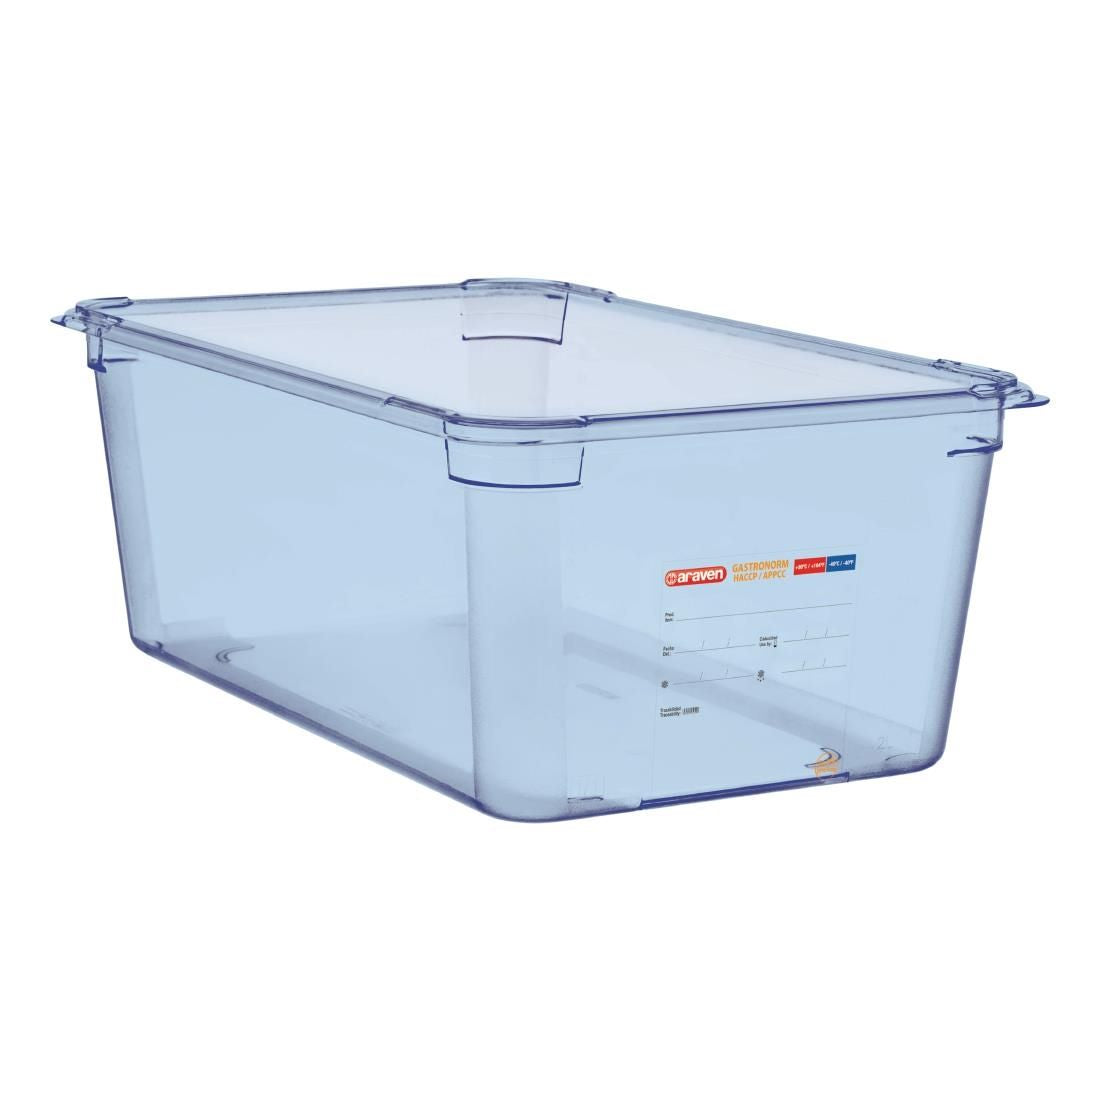 GP591 Araven ABS Food Storage Container Blue GN 1/1 200mm JD Catering Equipment Solutions Ltd